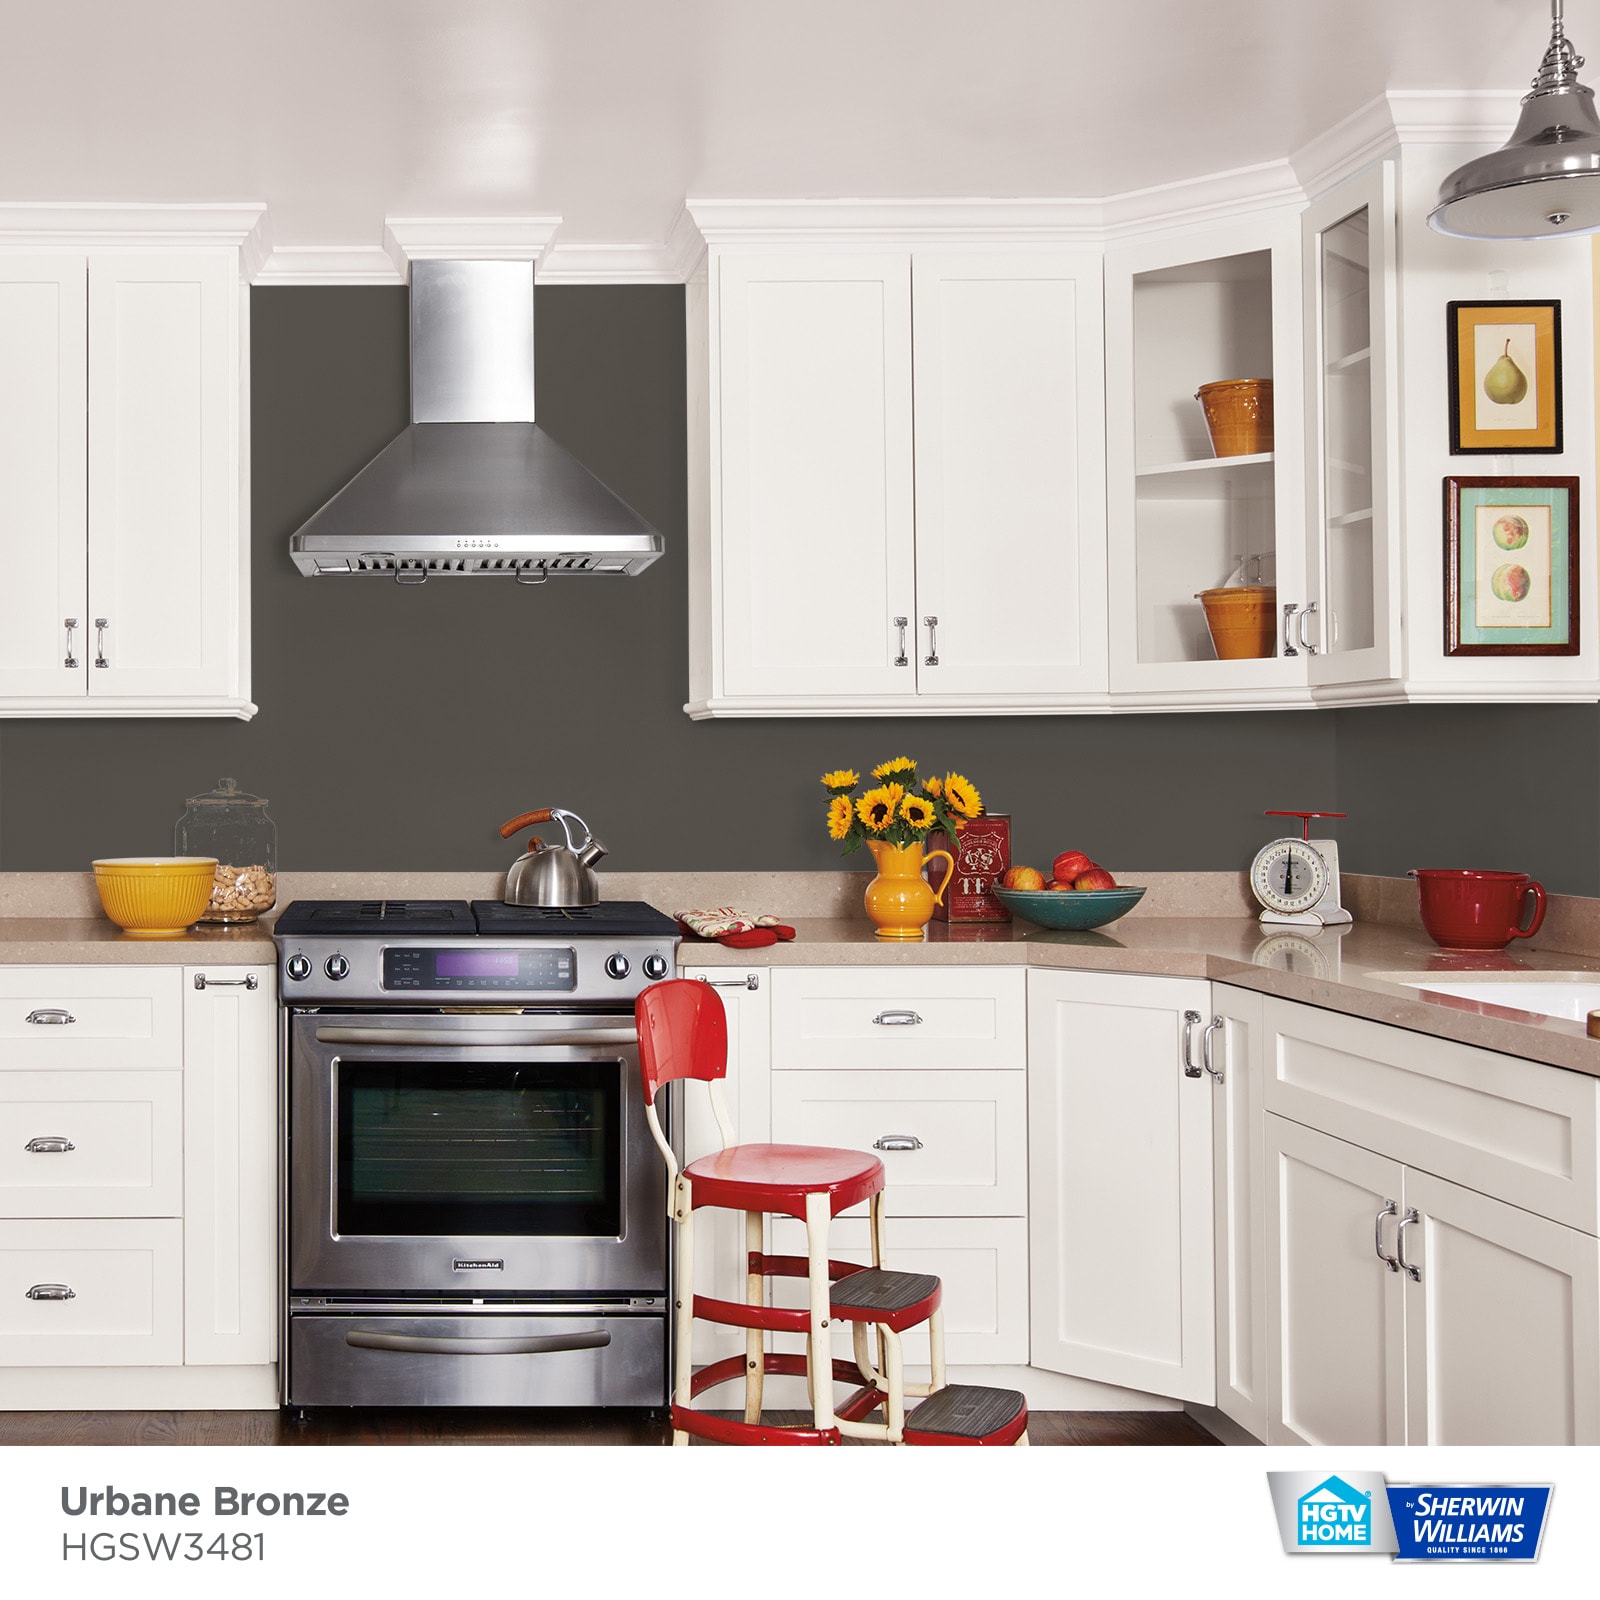 Urbane Bronze Paint Color on Cabinets - Arched Manor